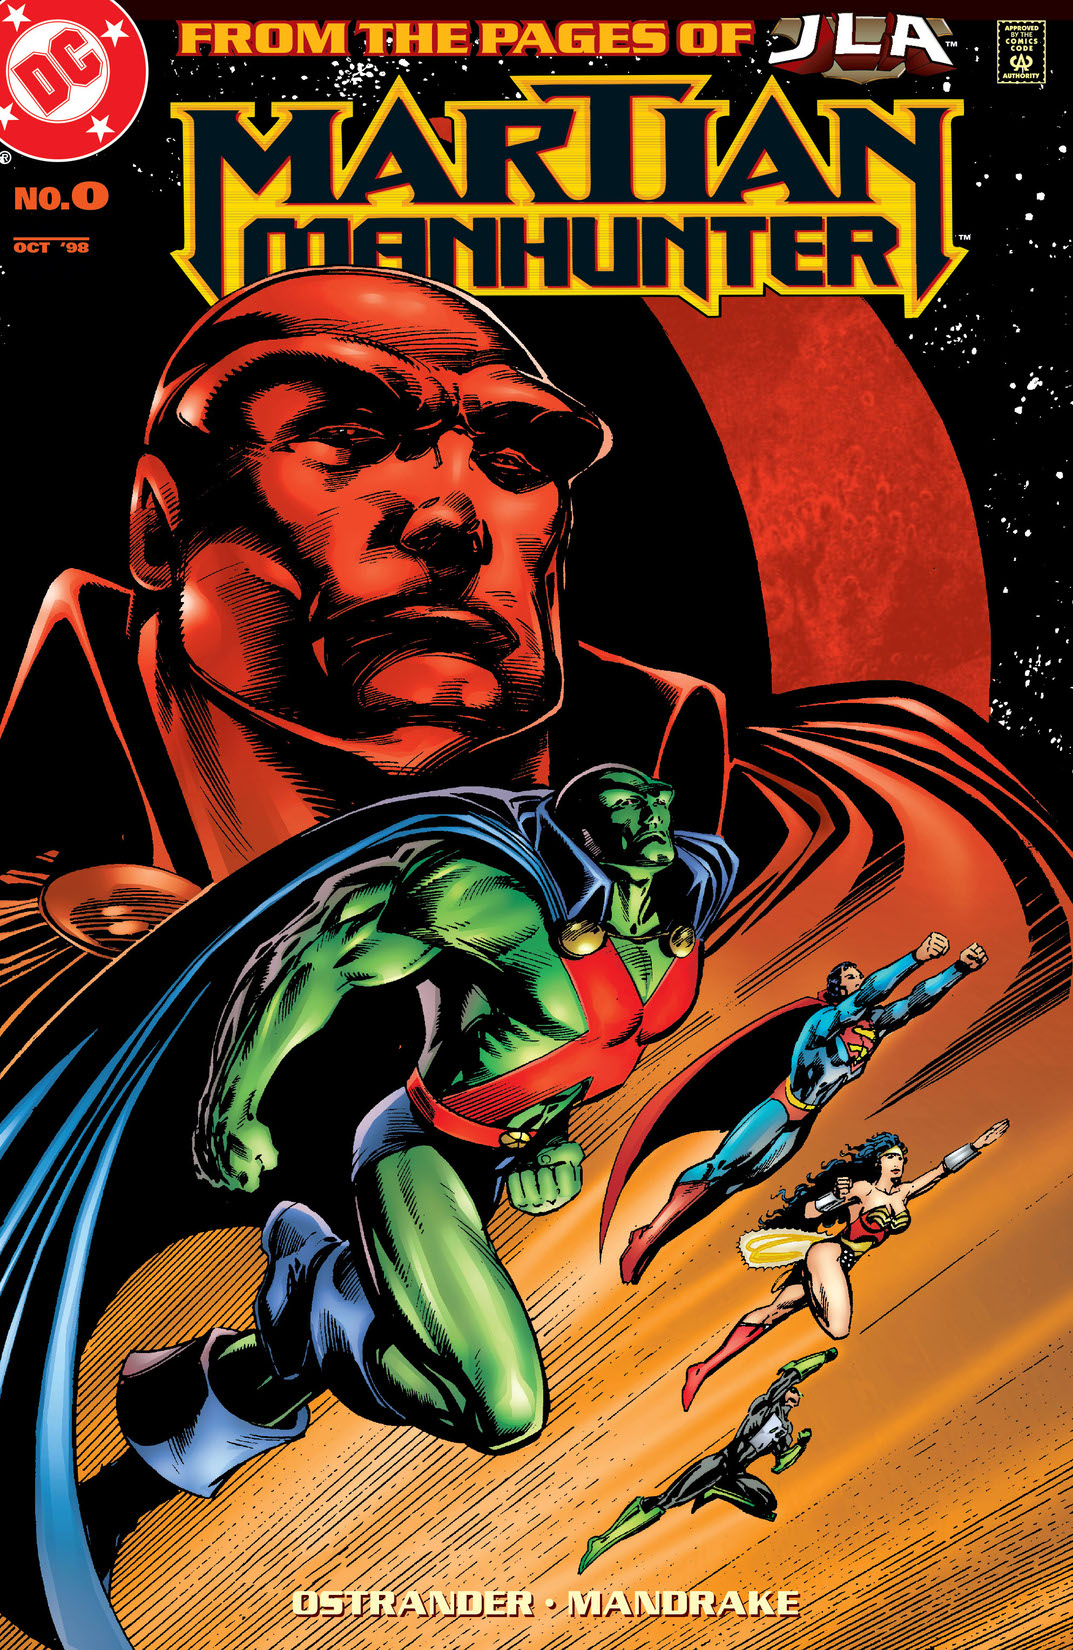 Martian Manhunter (1998-) #0 preview images